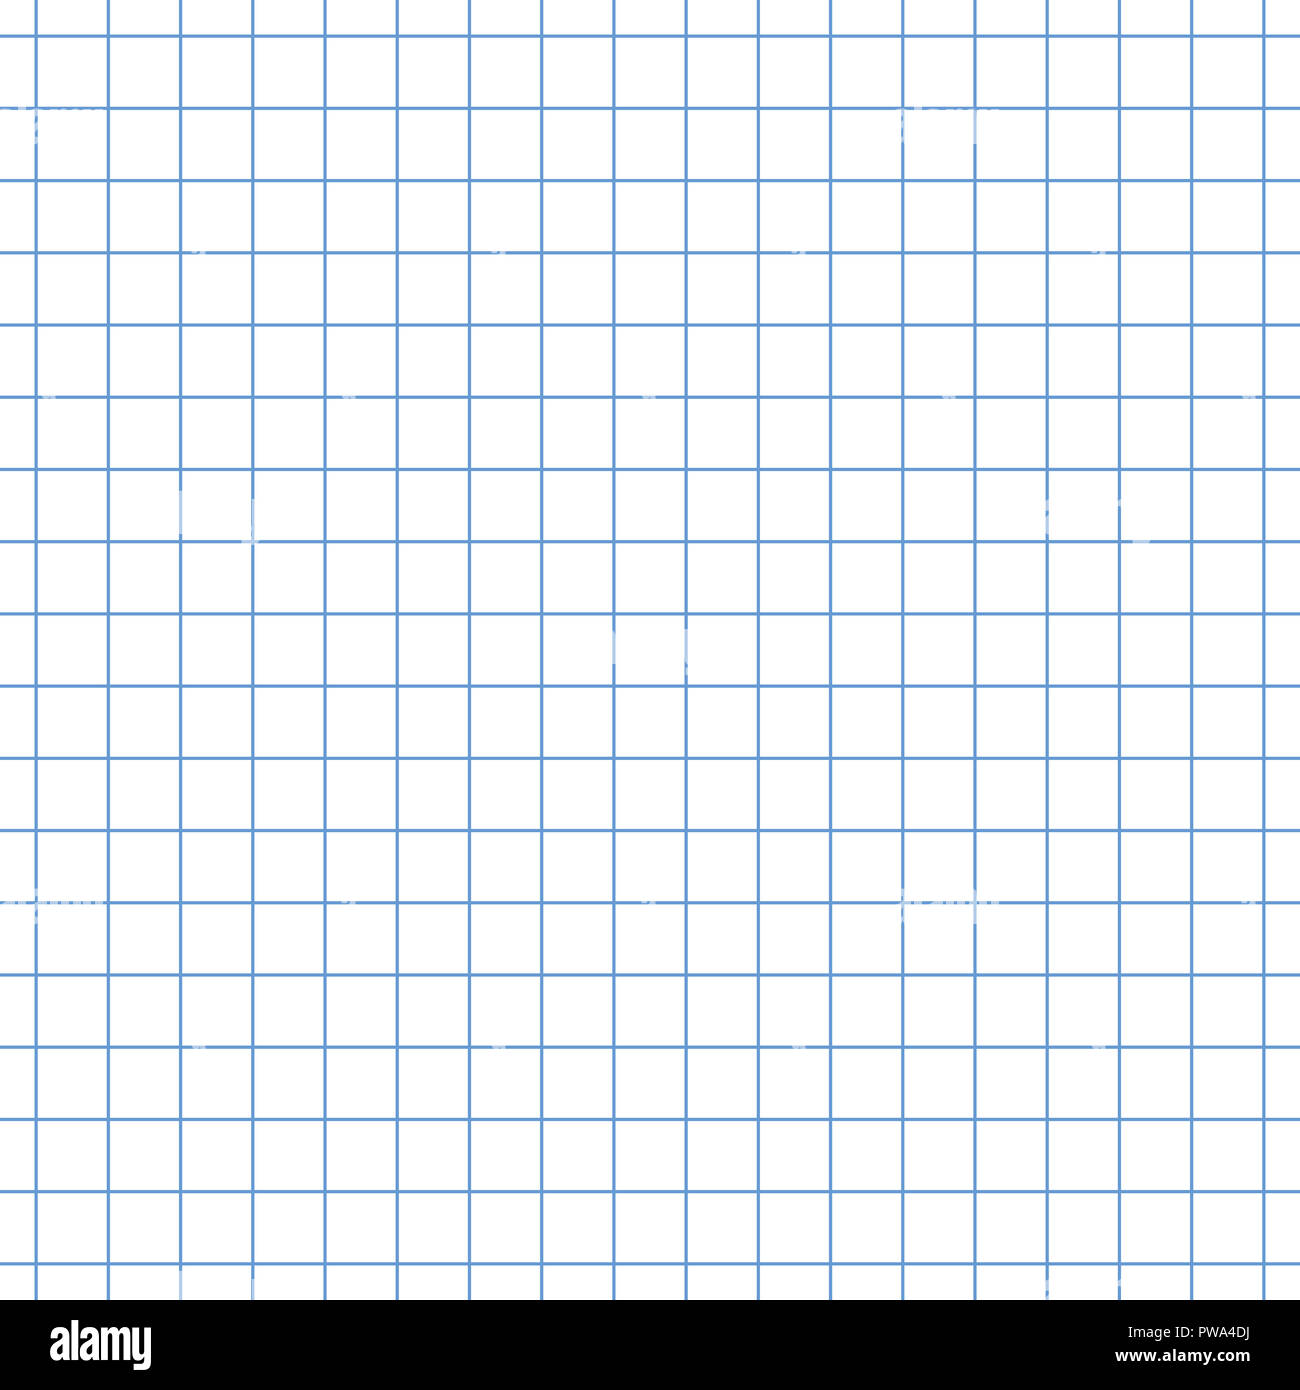 Seamless square grid graph paper pattern in blue Stock Photo